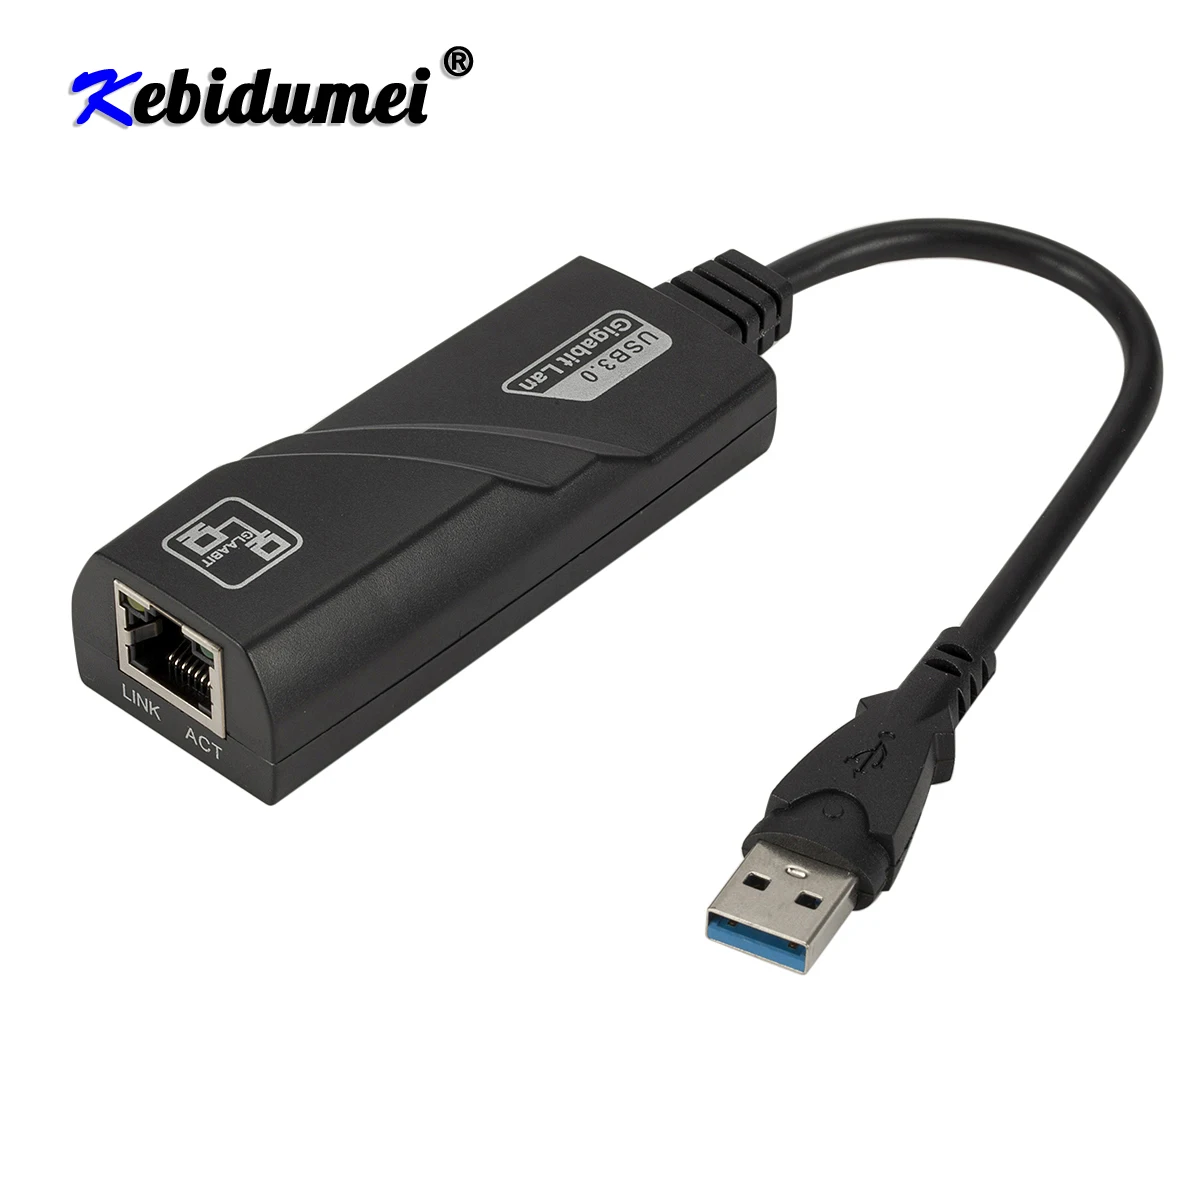 Hot Wired USB 3.0 To Gigabit Ethernet RJ45 LAN 10/100/1000 Mbps Network Adapter Ethernet Network Card For PC Wholesales